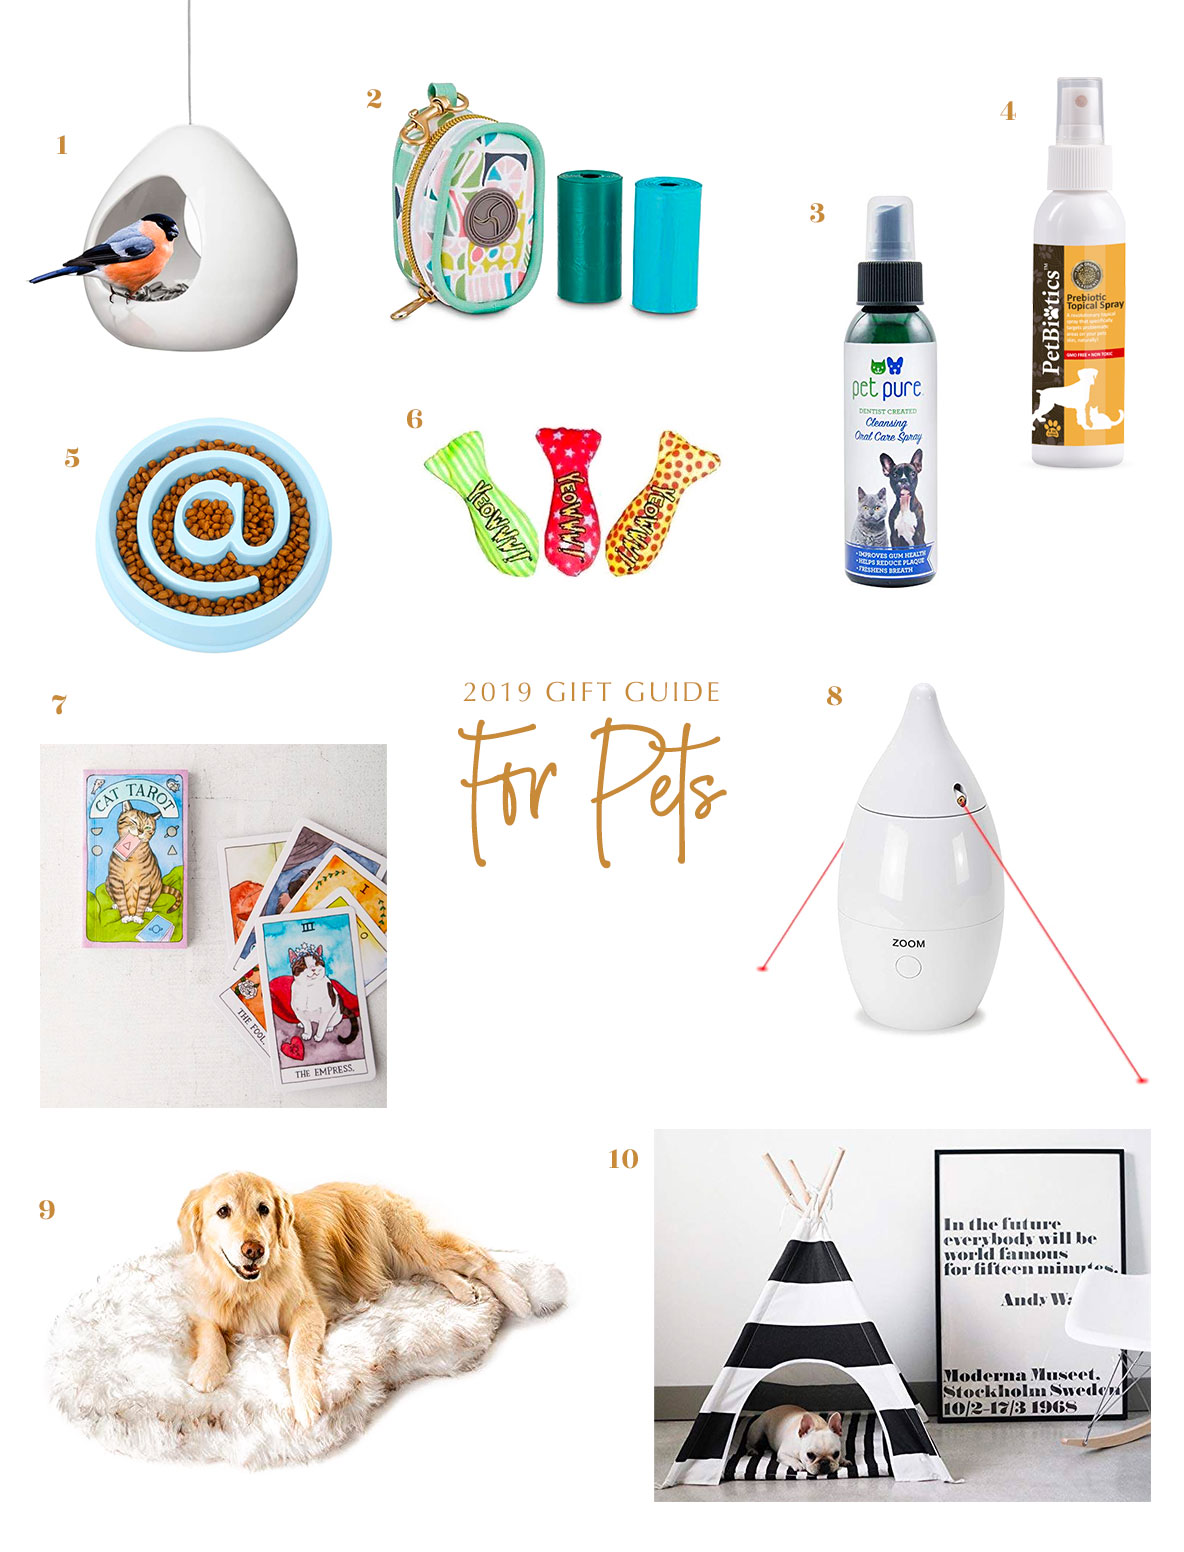 2019 The Lovely Geek Gift Guide: For Pets